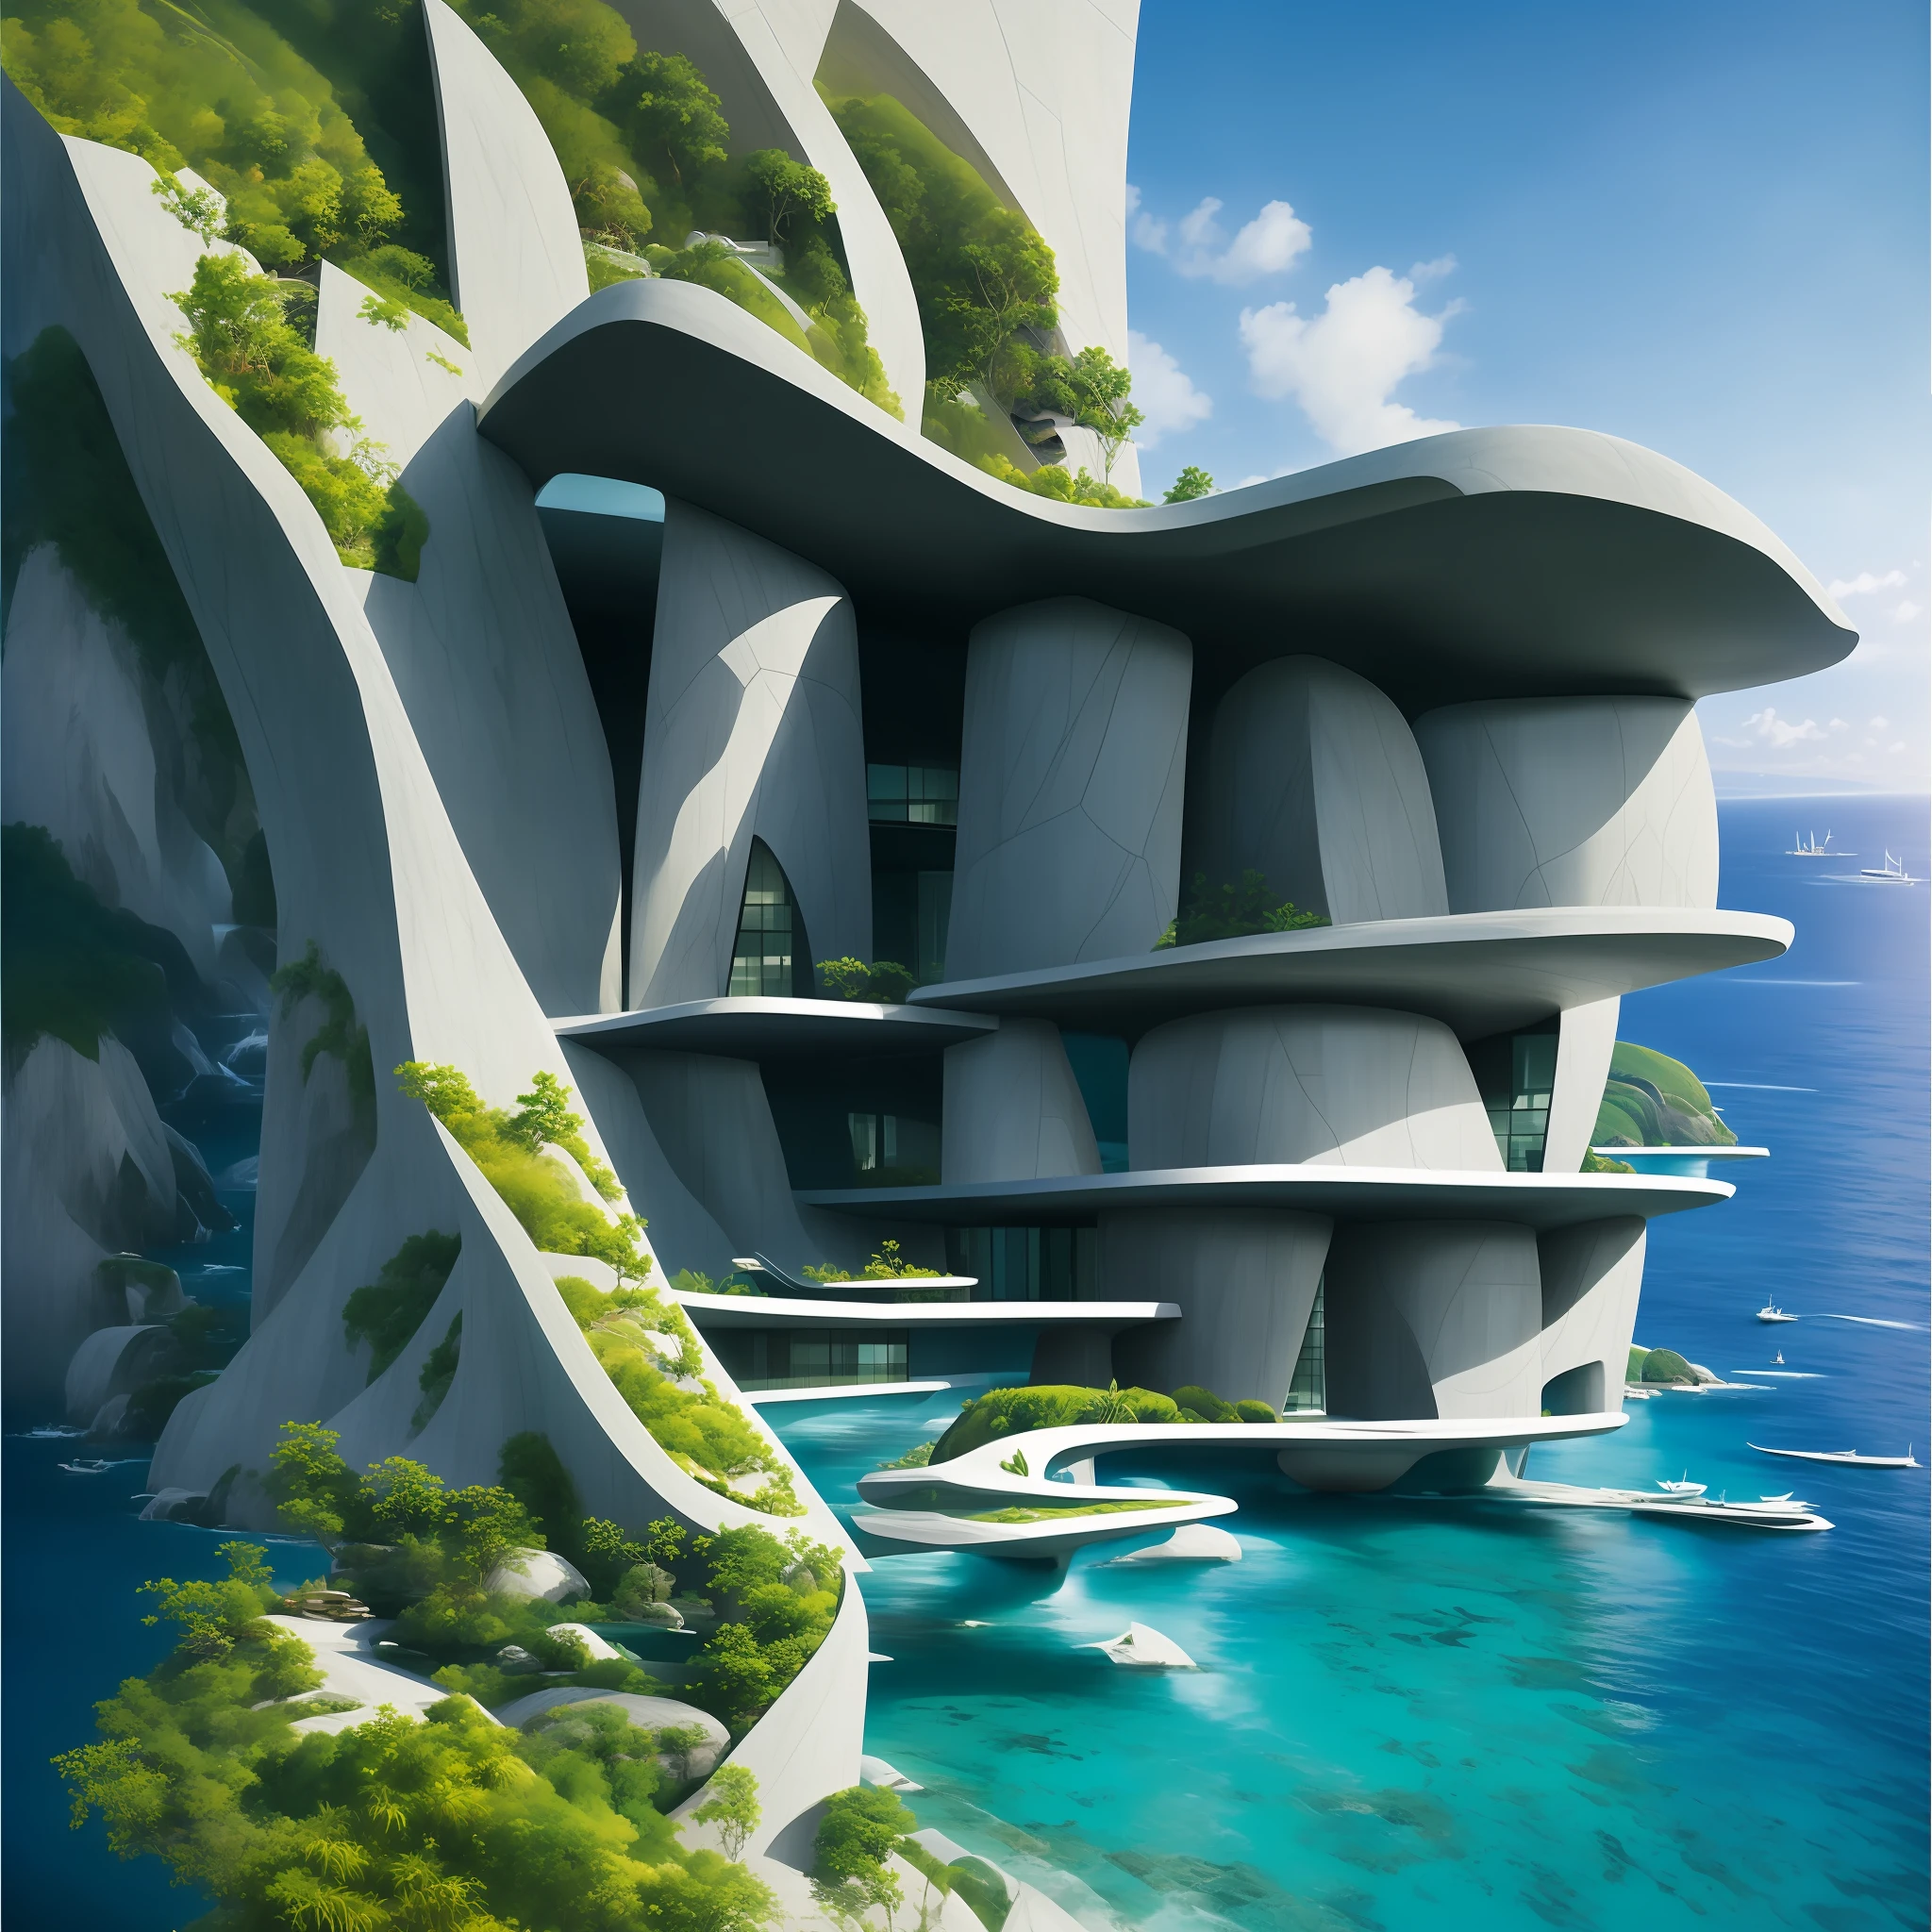 a modern futuristic design large cliff House's with a artificial waterfall and a pool in the middle, nature meets architecture, built around blue ocean, realistic beehive architecture, organic architecture, very close to real nature, breathtaking render, island with cave, stunning architecture, luxury architecture, realistic fantasy render, by Zha Shibiao, epic and stunning, architectural visualization, epic architecture, concept art. 8 k